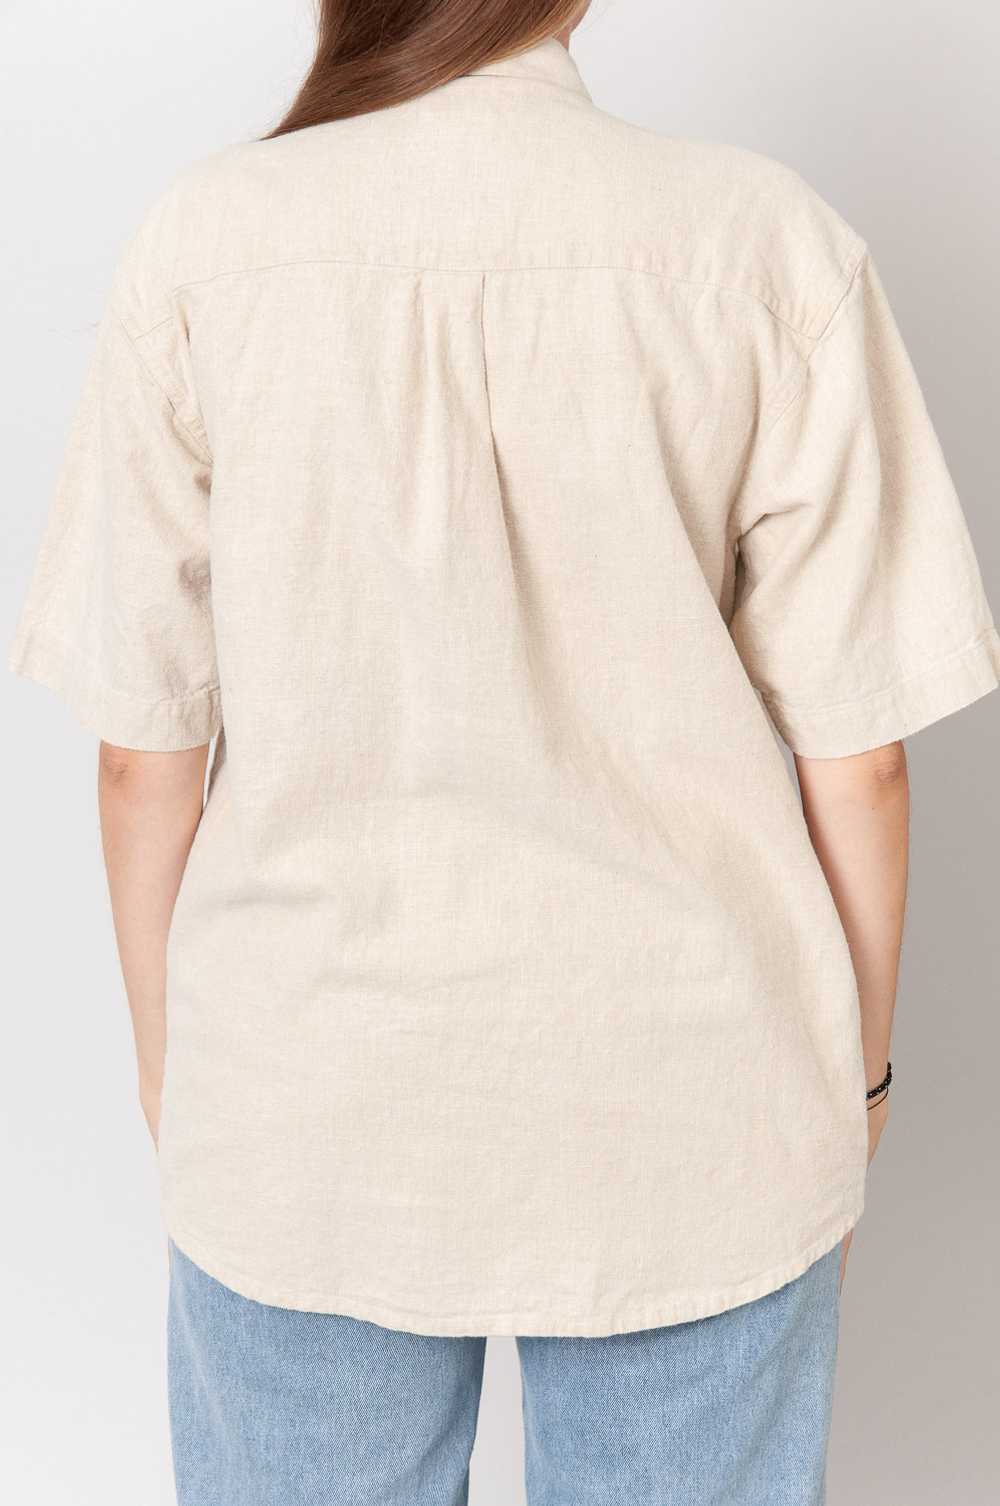 Edelweiss short sleeve shirt Beige With Stick - image 4